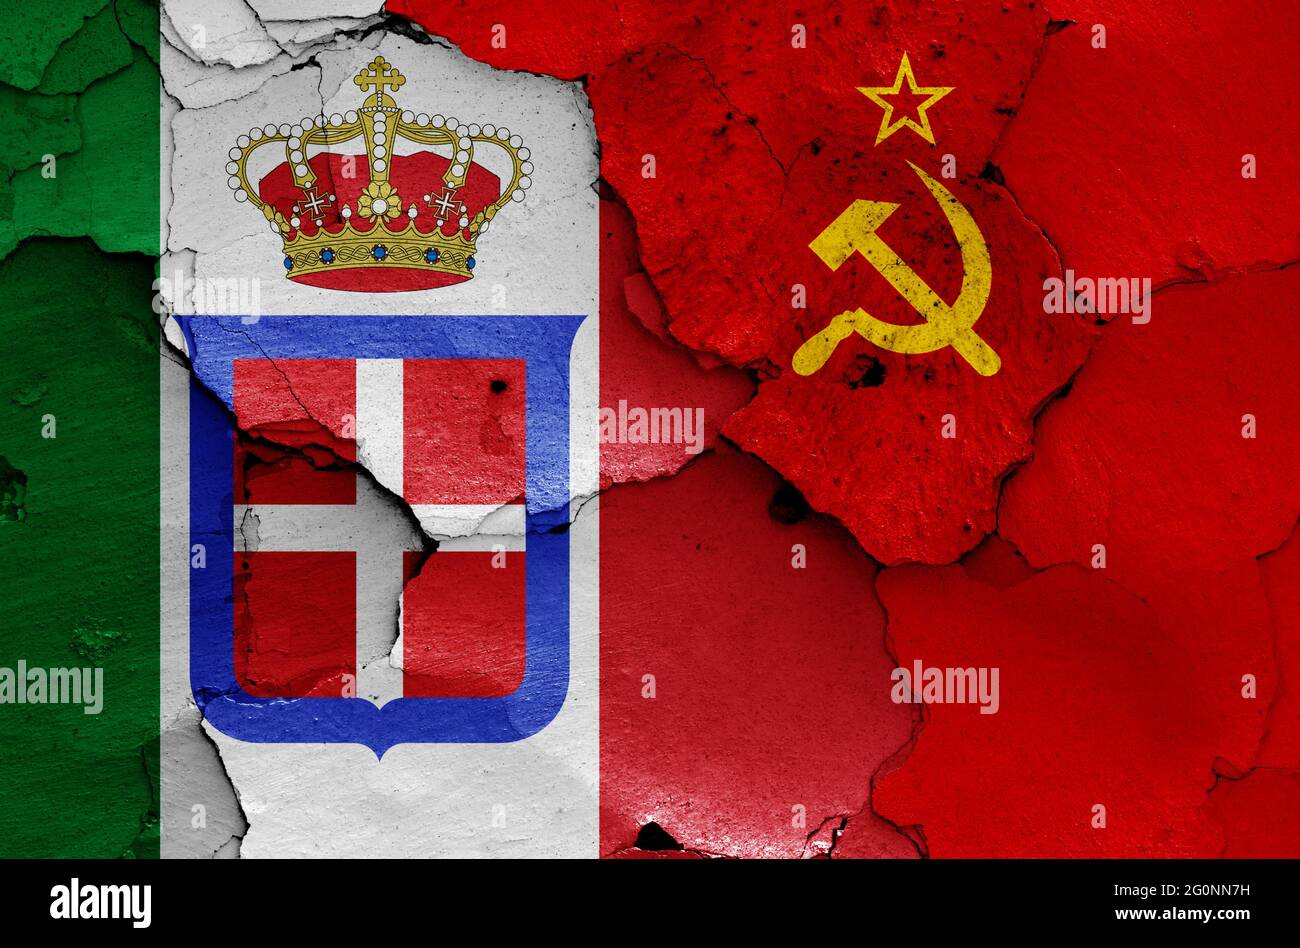 historical flags of Kingdom of Italy and Soviet Union in WW2 Stock Photo